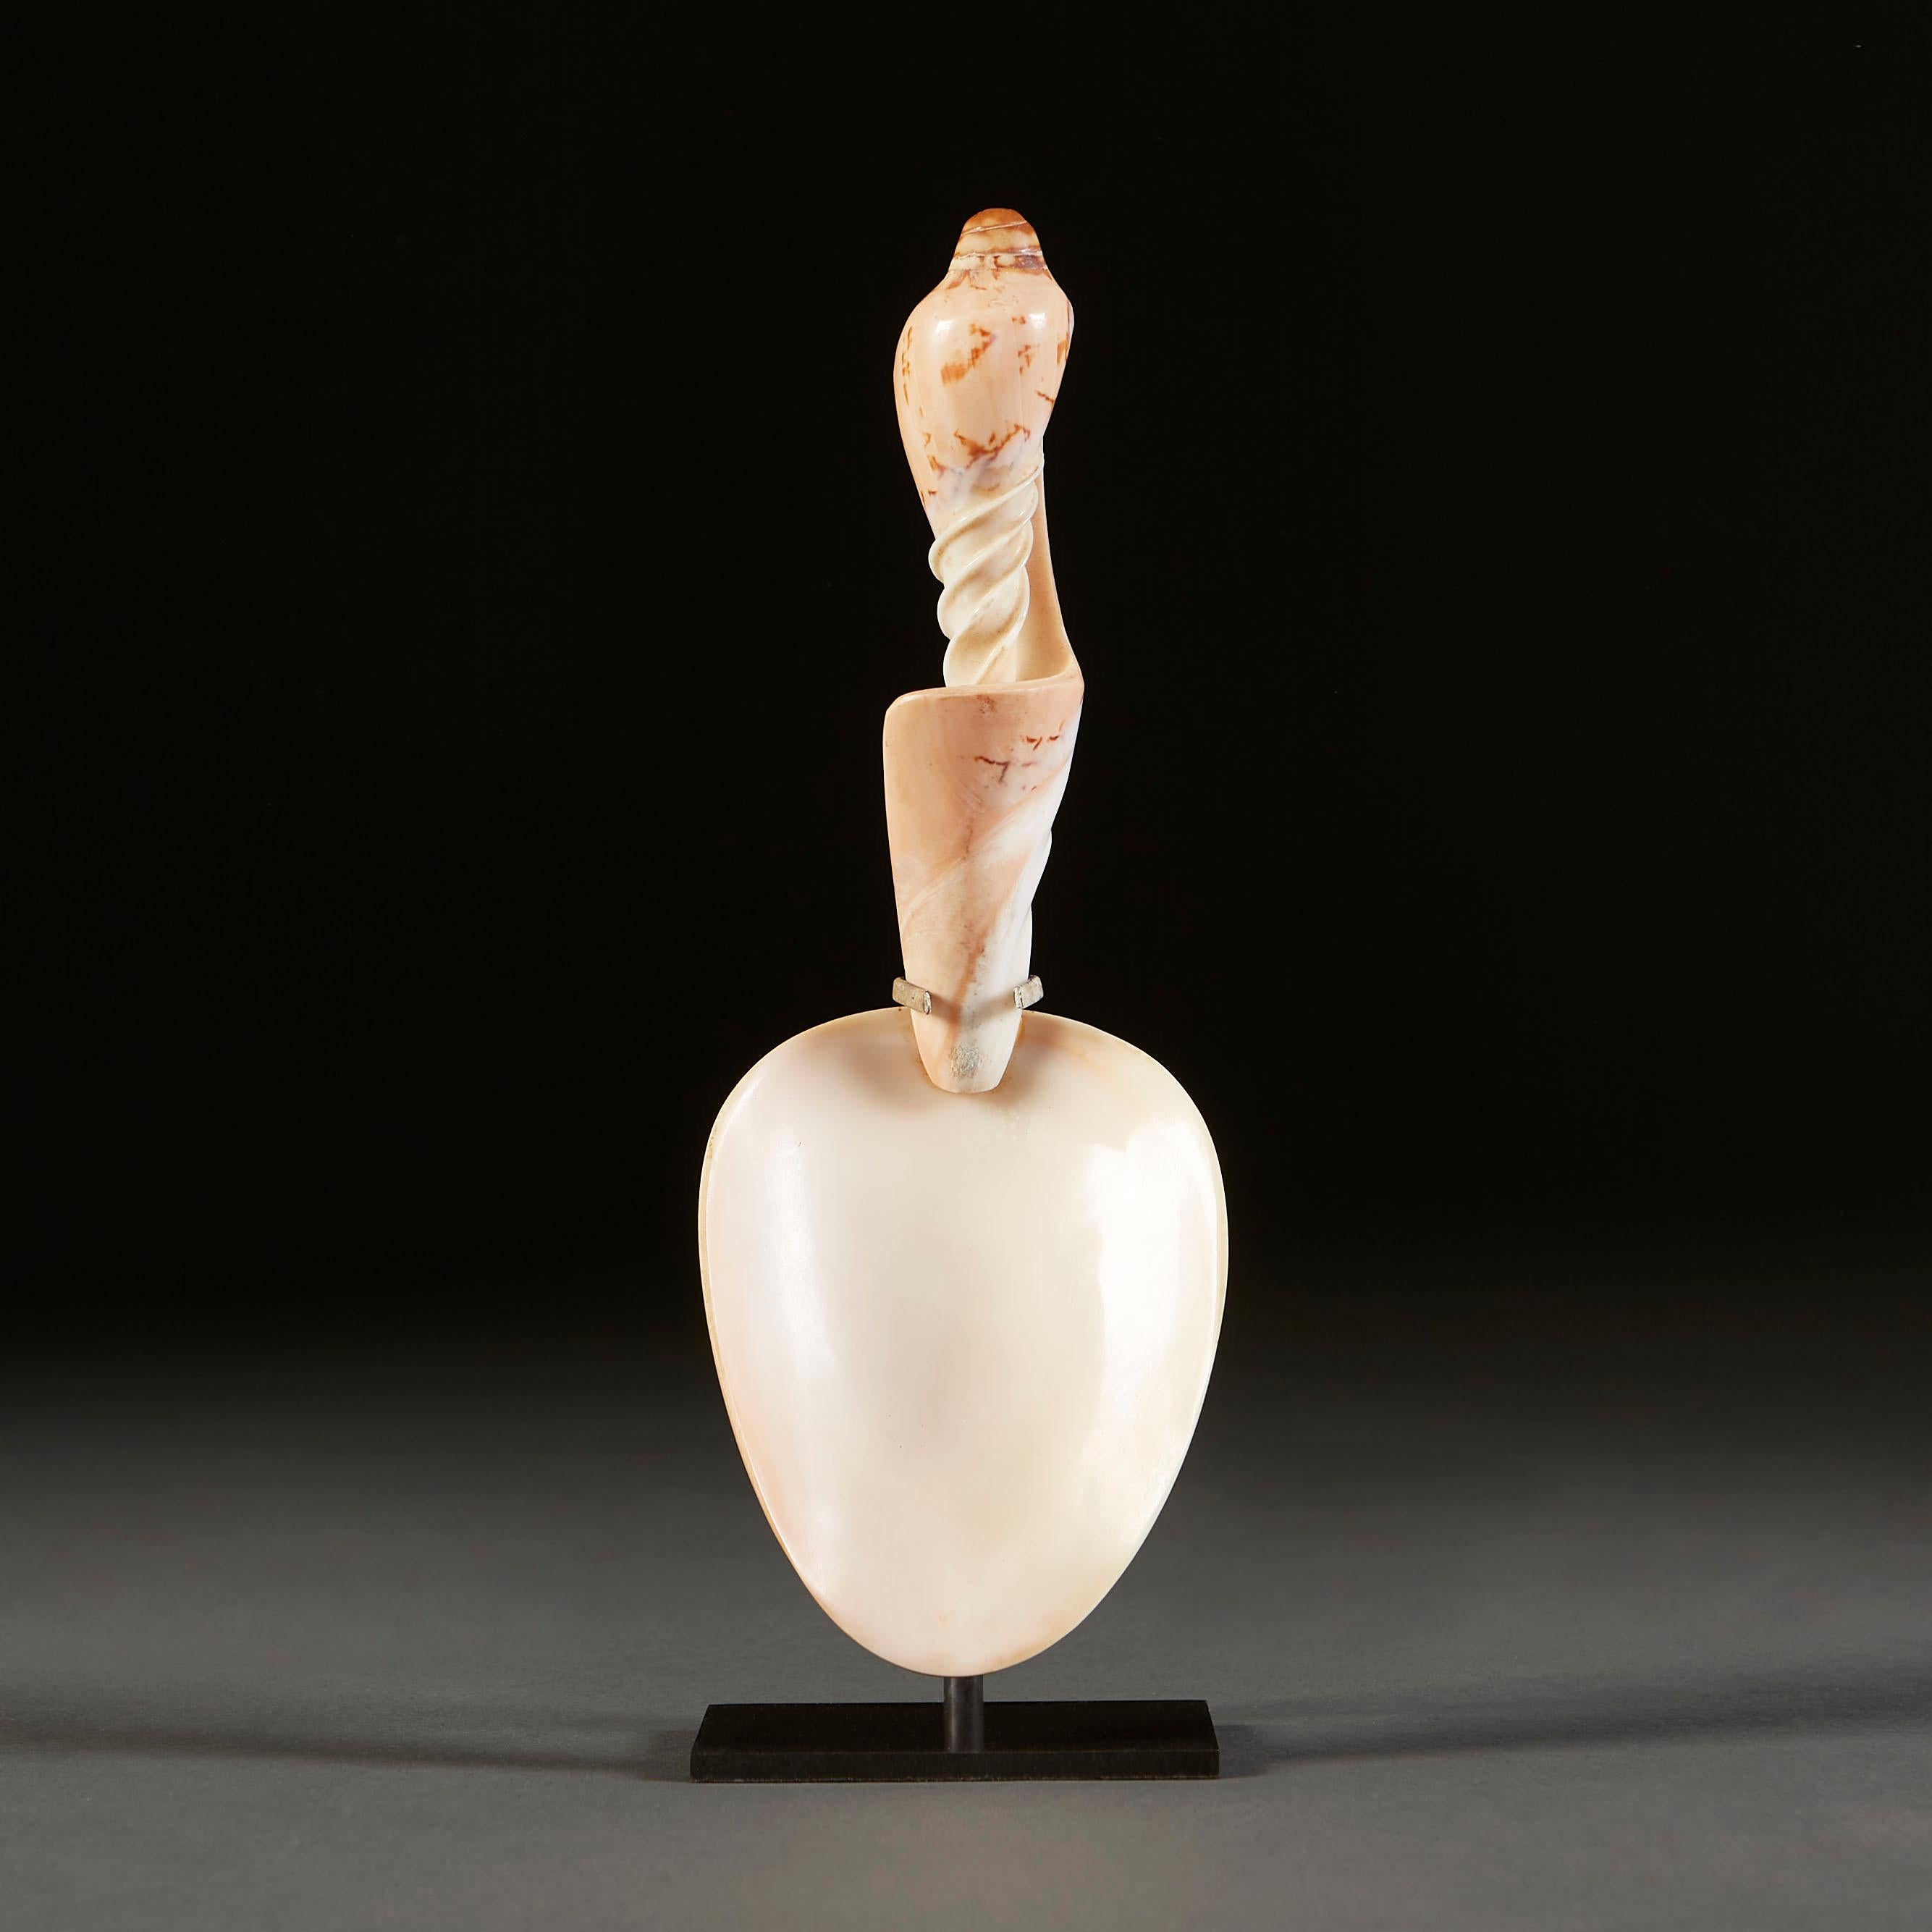 An early twentieth century shell spoon, comprised of two shells and supported on a metal stand. The handle is delicately carved from a singular shell, with the outer portion of shell removed to reveal the delicate spiral form inside. The head of the